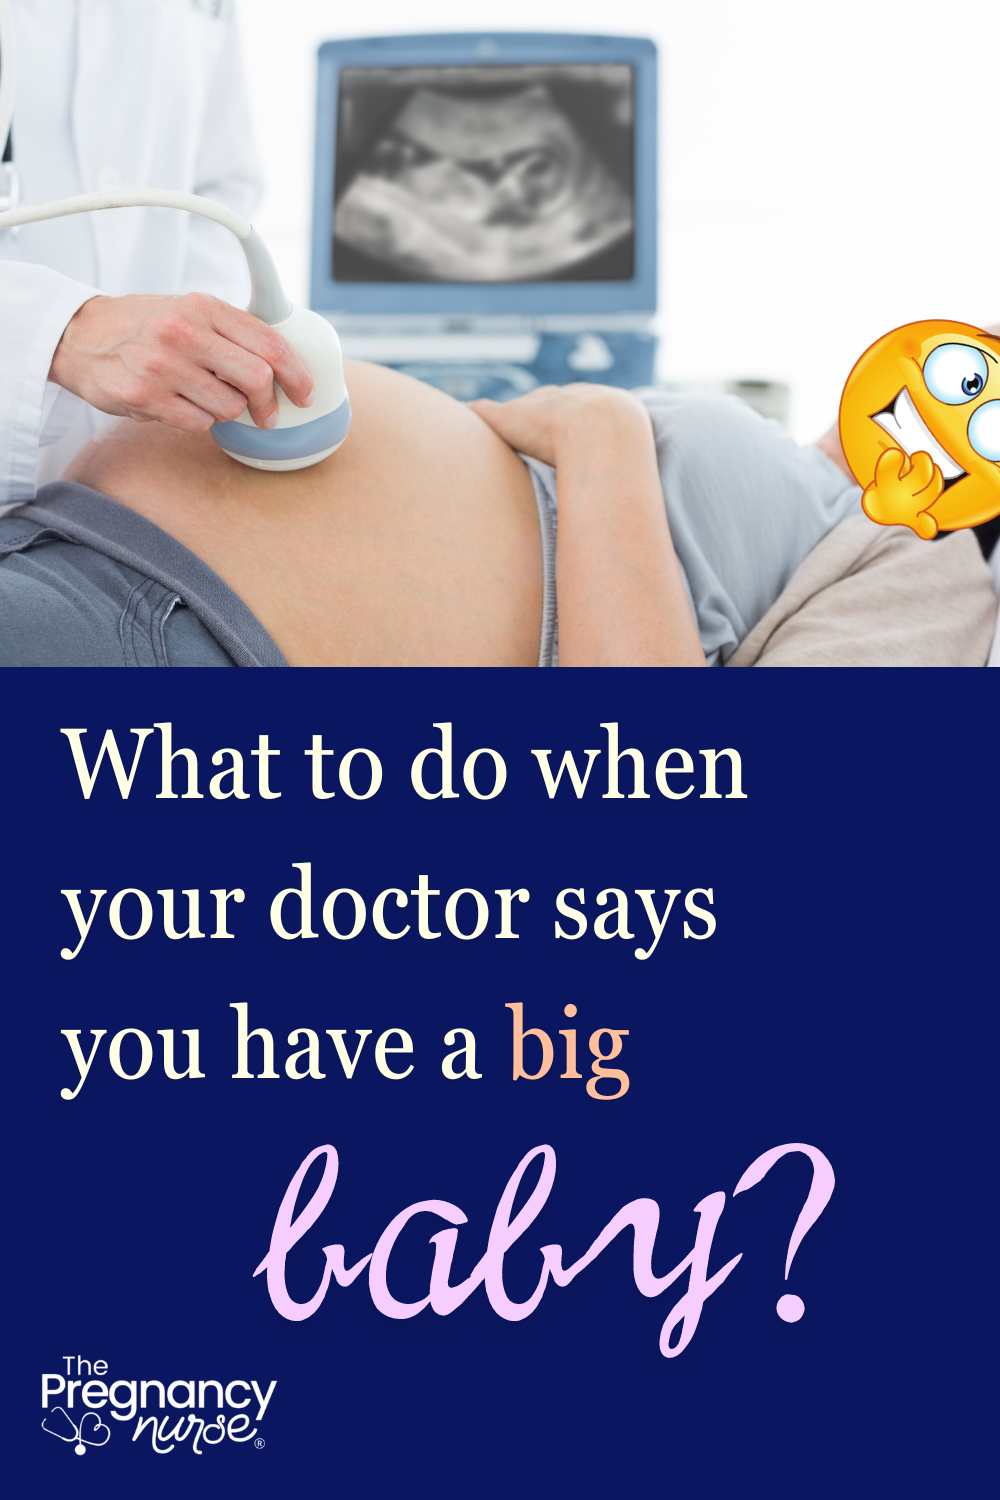 What should you consider when your provider says you have a big baby? What things should you consider for your next steps if baby is LGA, large for gestational age or has macrosomia.